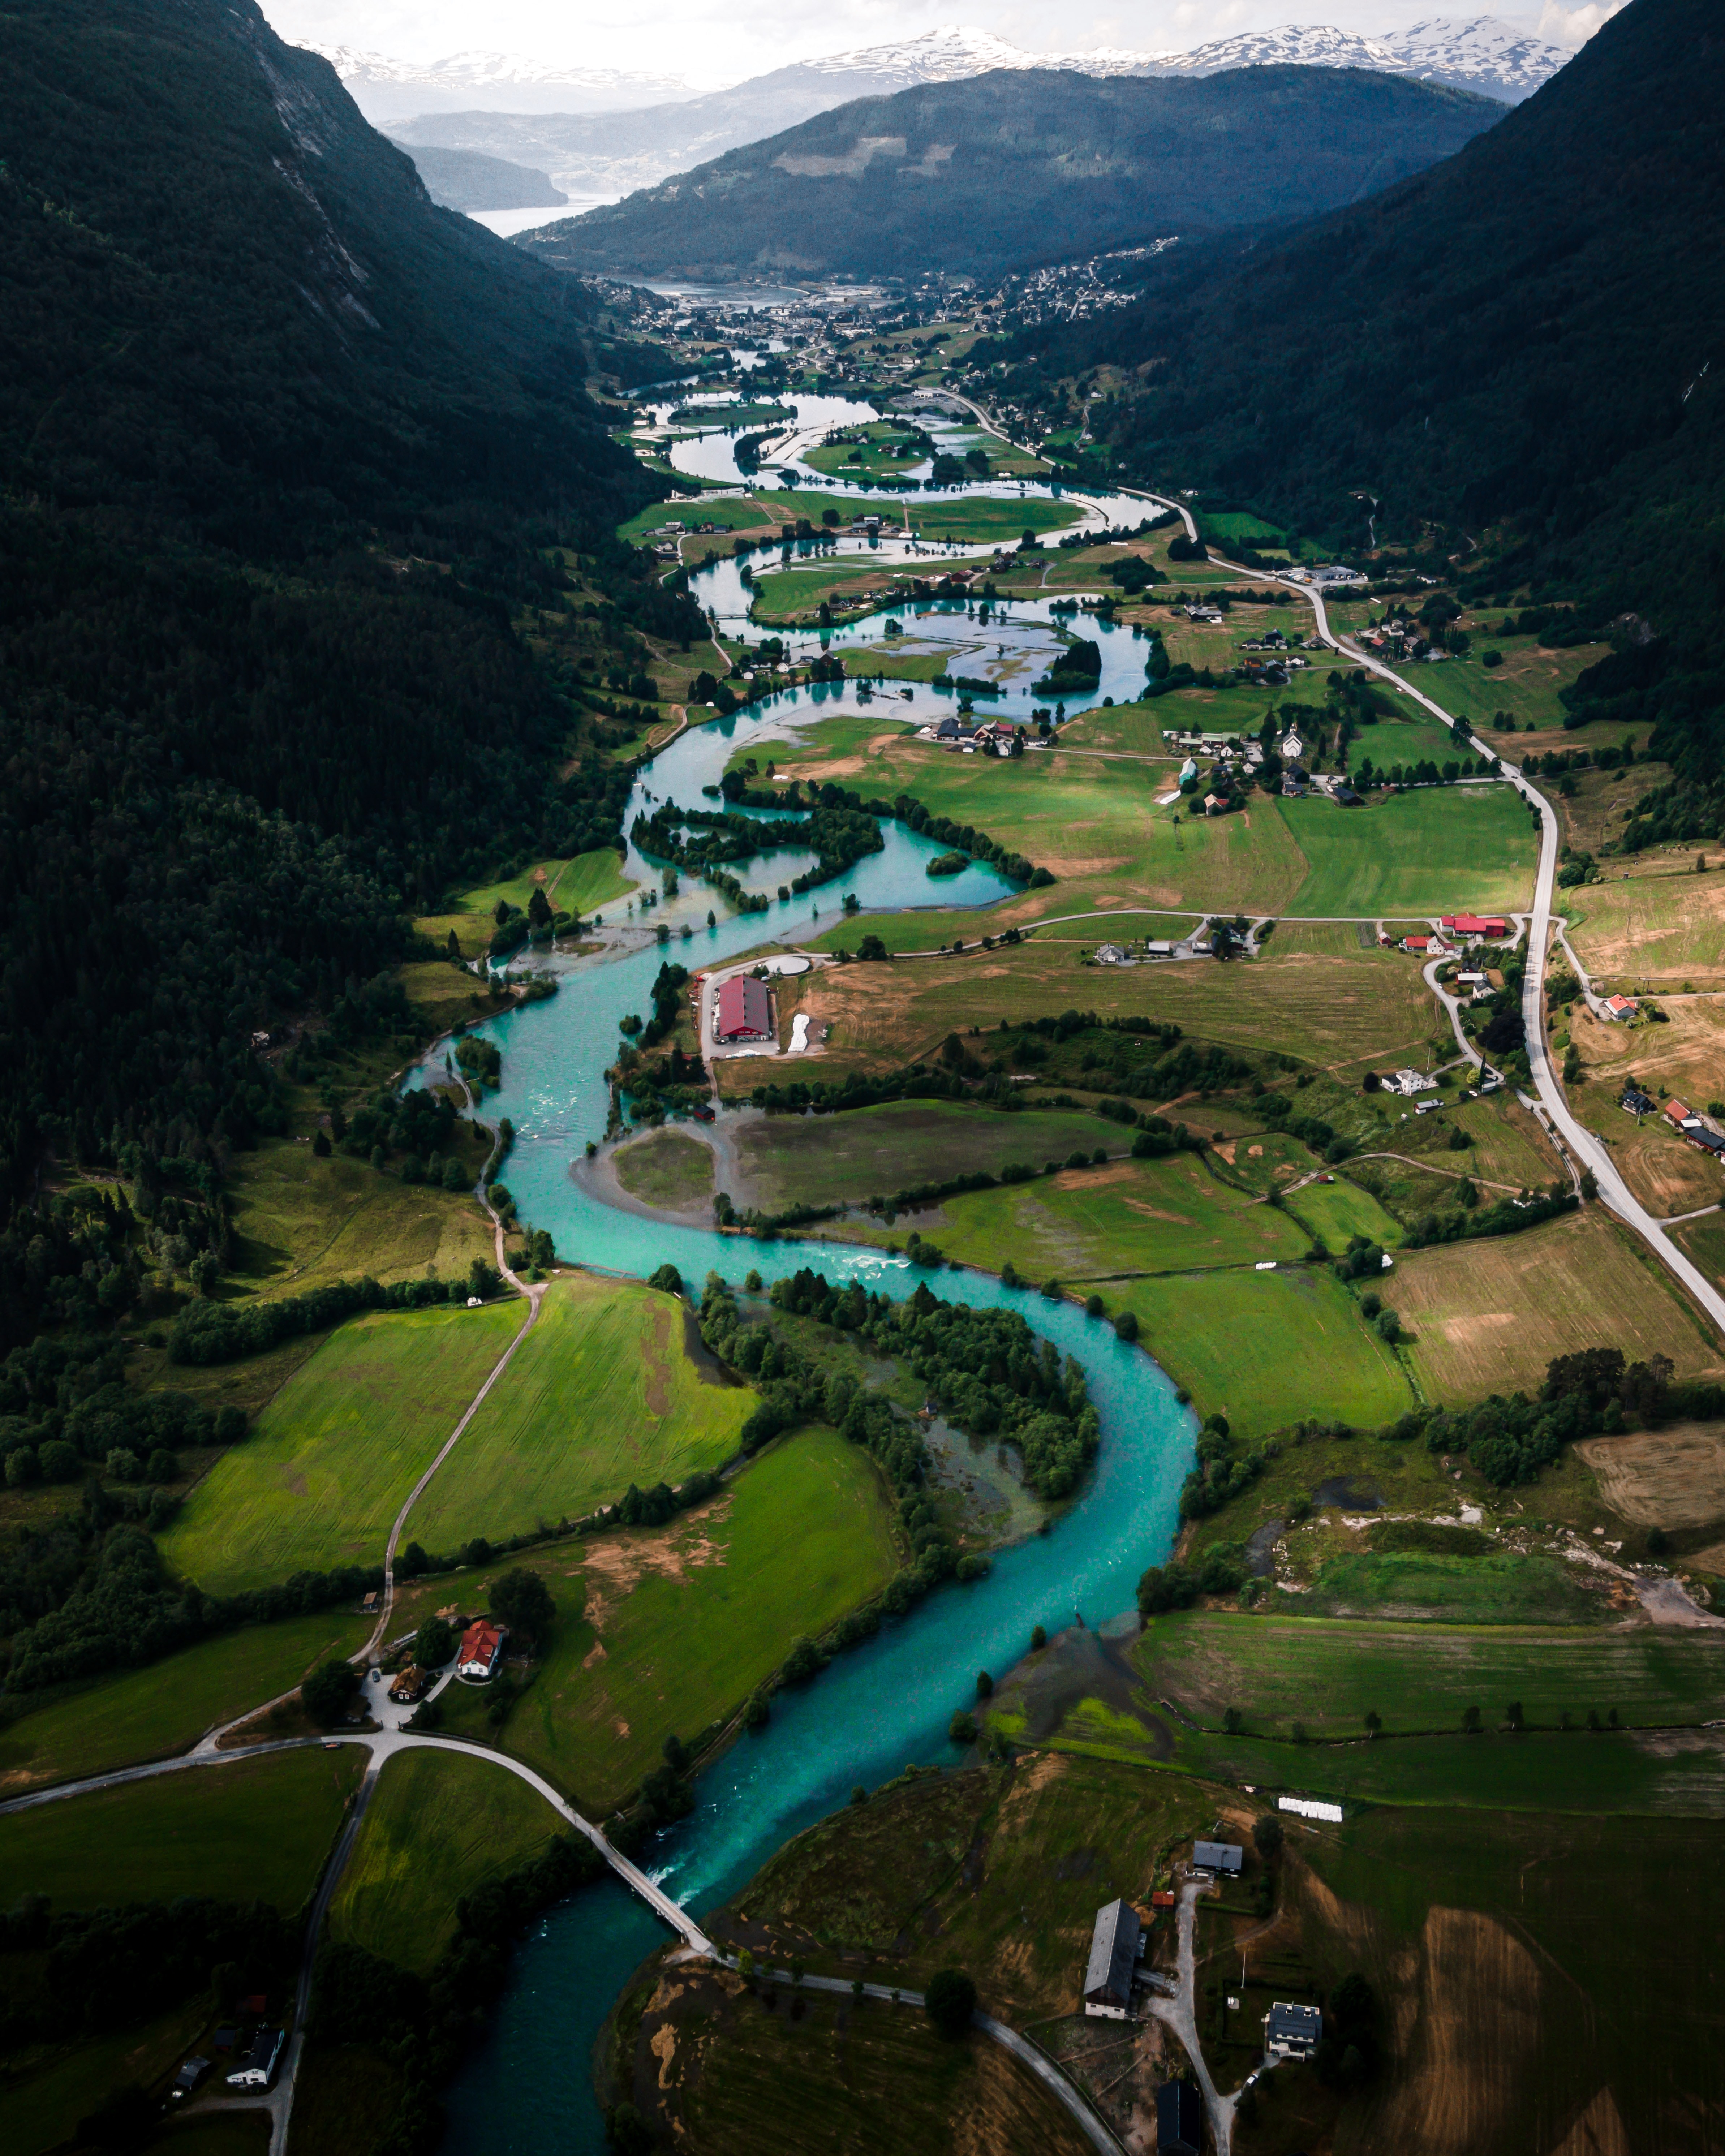 rivers, winding, nature, building, sinuous, mountains, village